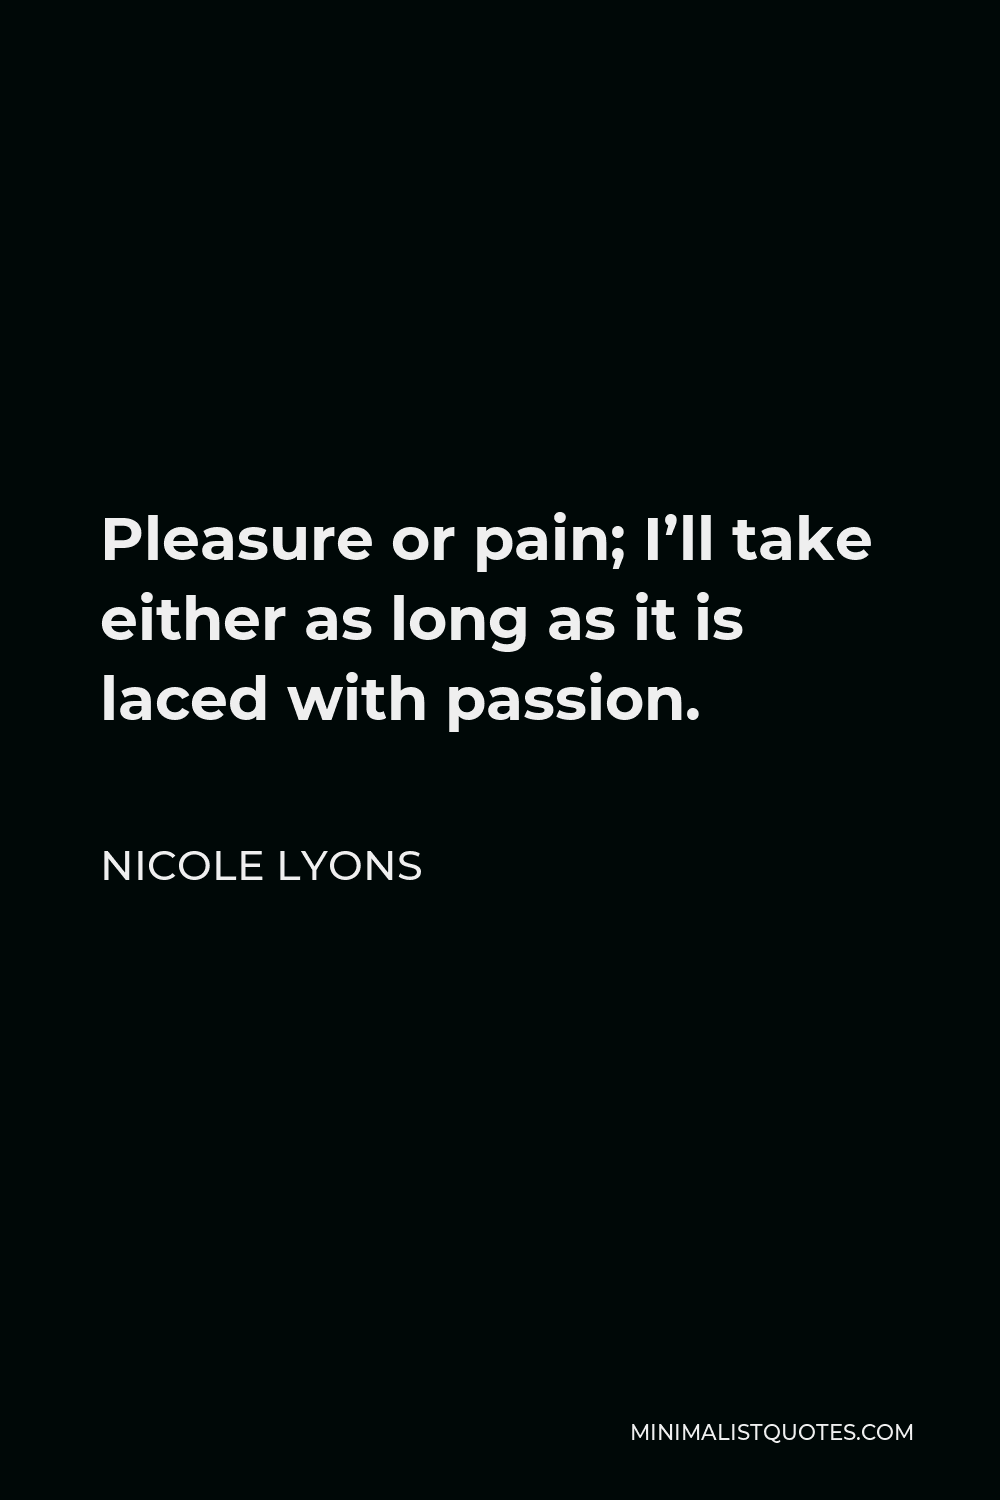 Nicole Lyons Quote - Pleasure or pain; I’ll take either as long as it is laced with passion.